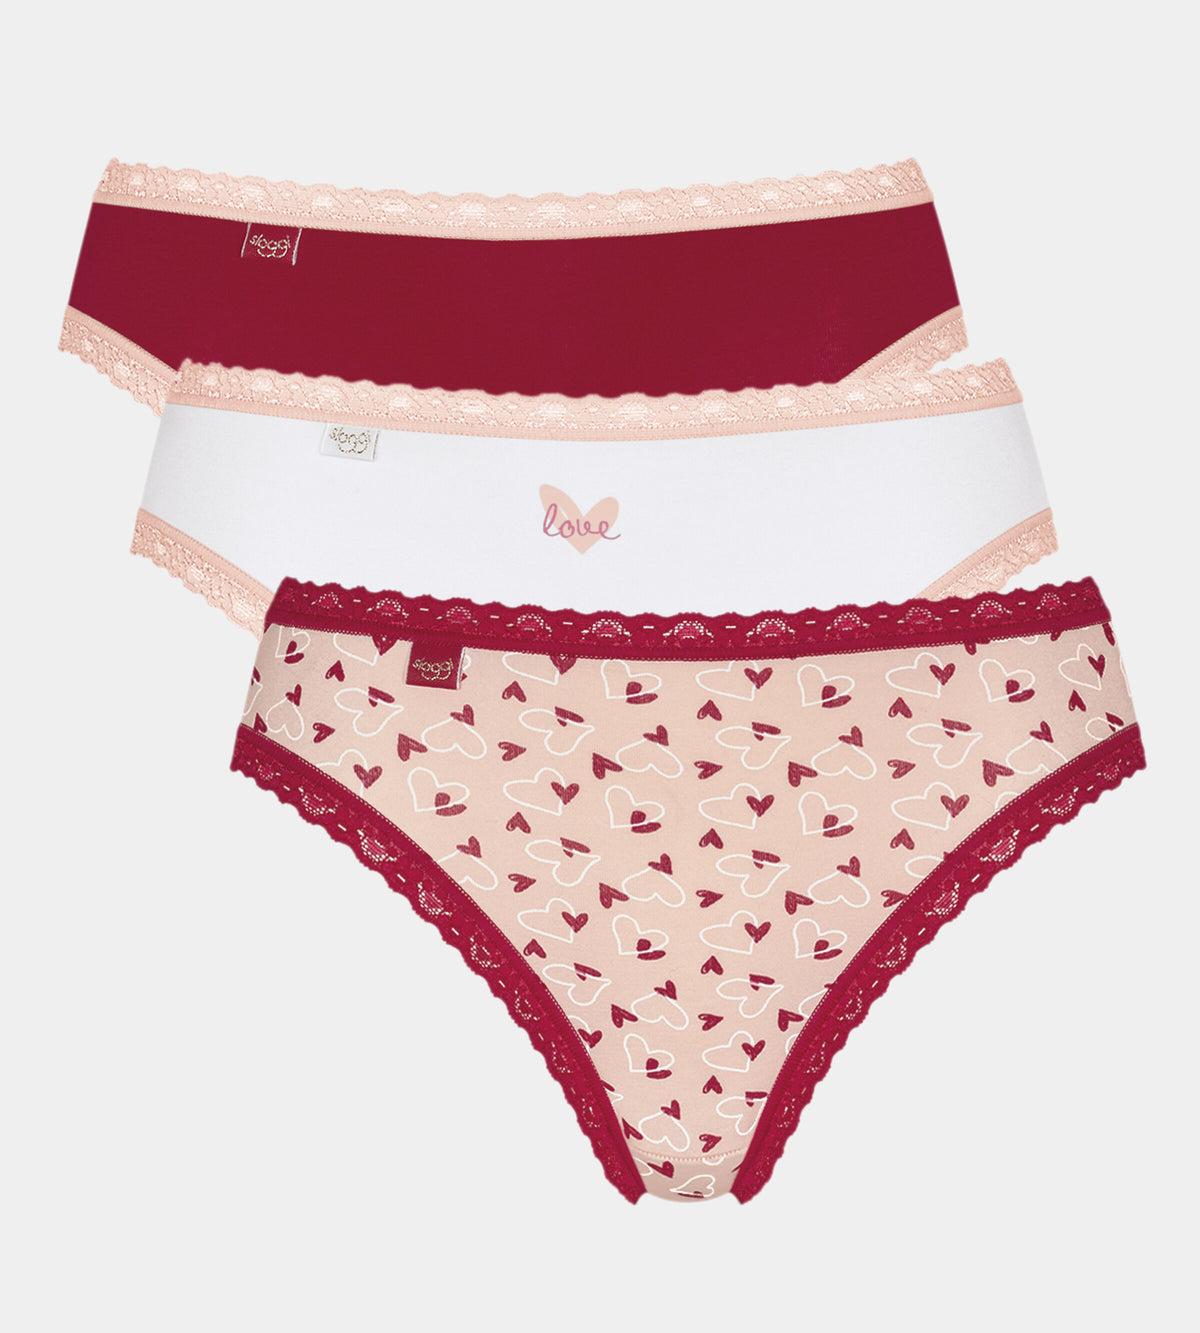 Sloggi 24/7 Weekend Tai Briefs Knickers 3 Pack 10198237 Red Light Print Hearts Combination M005